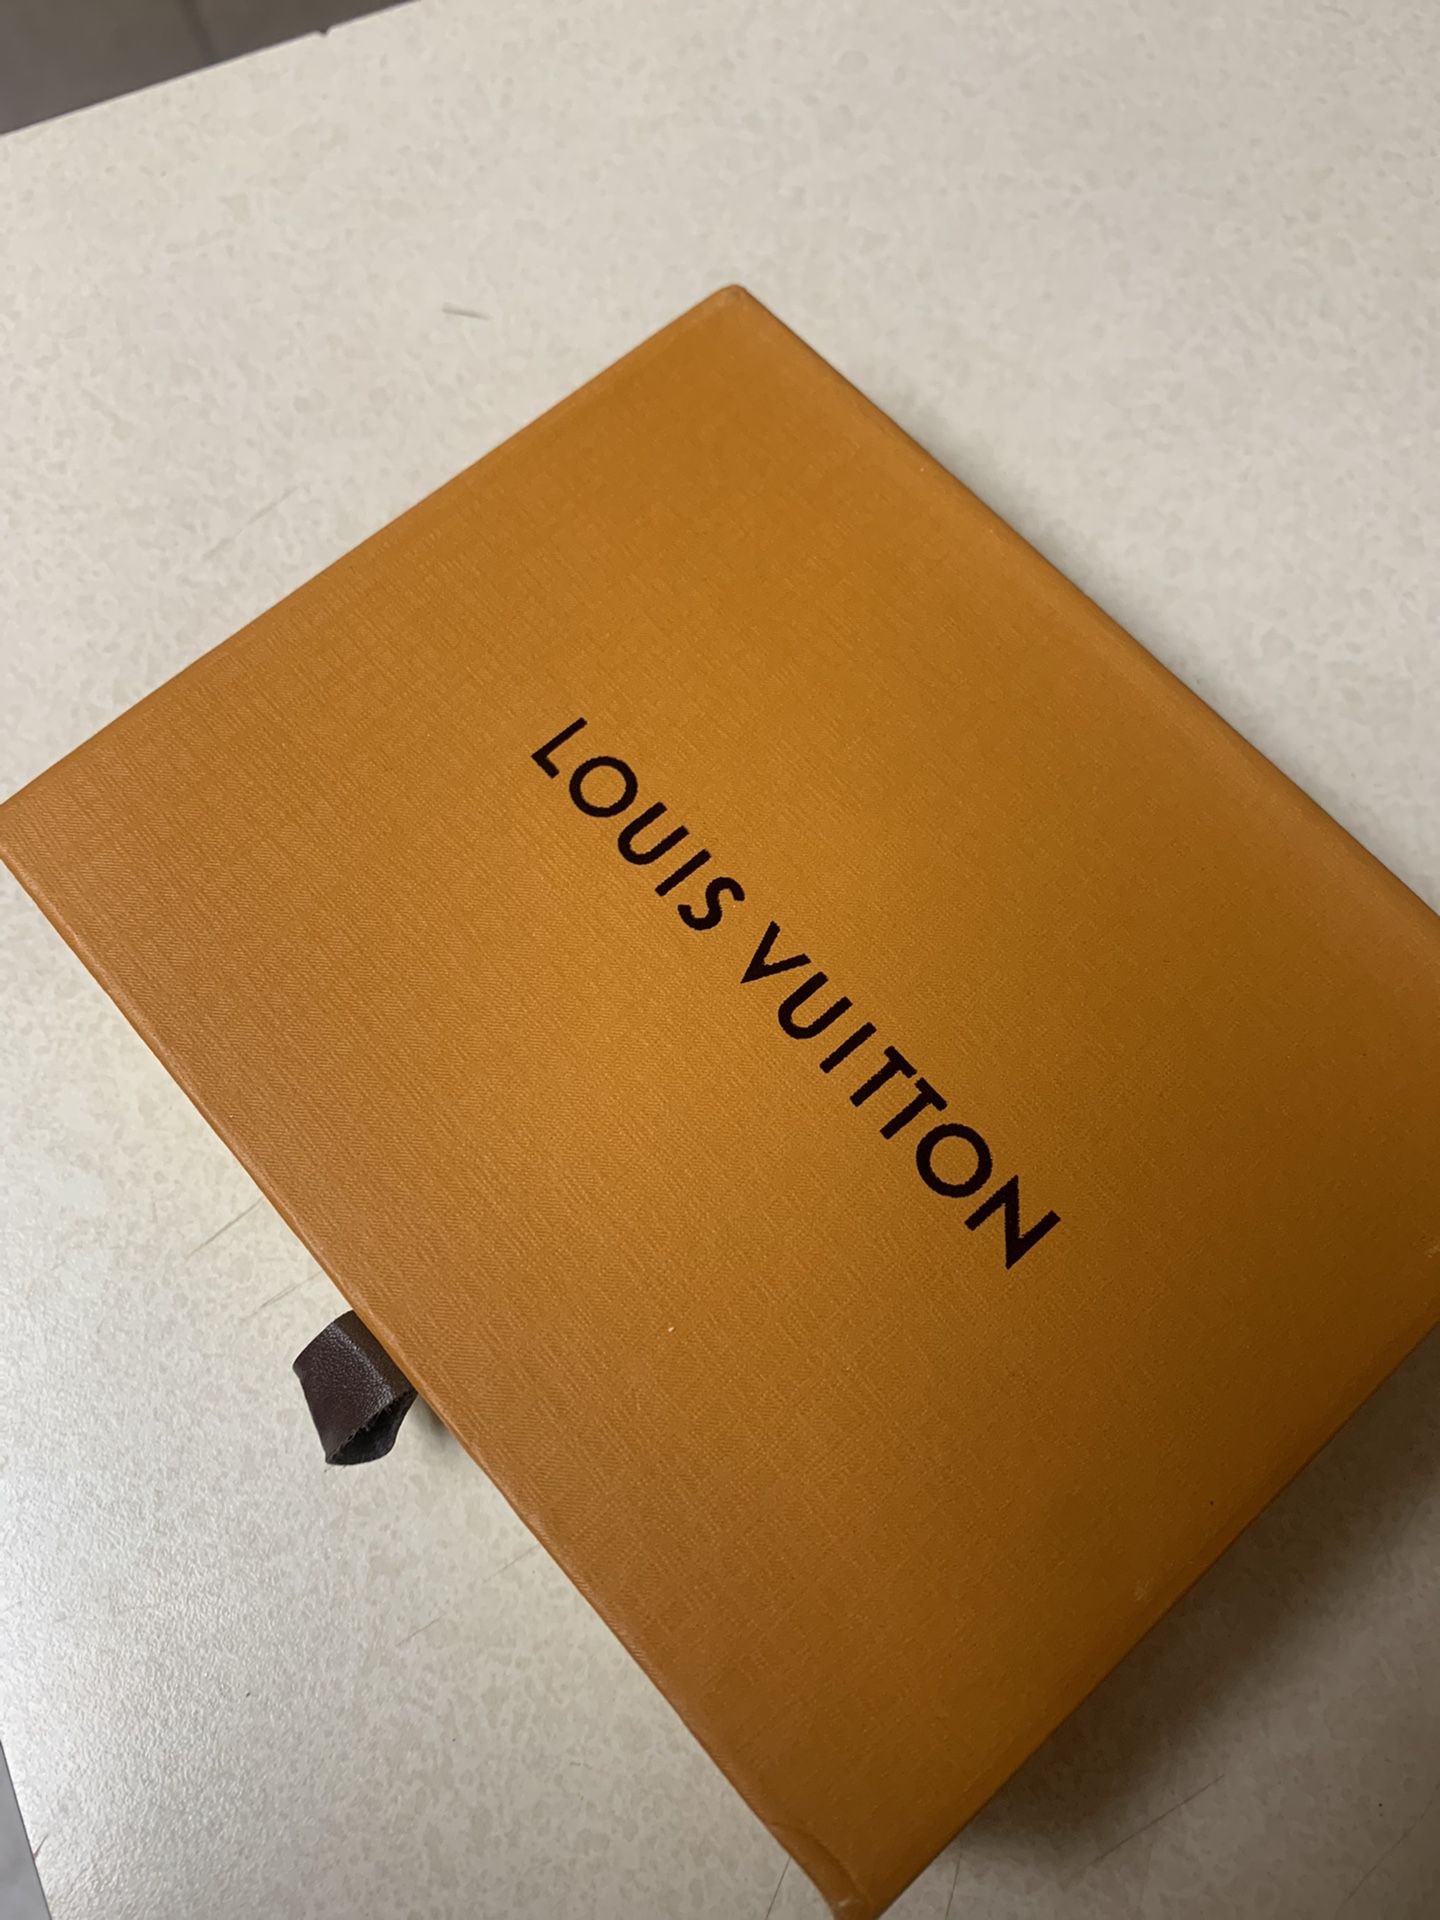 Louis Vuitton Long Wallet 519426/8833468 for Sale in Spring Hill, FL -  OfferUp